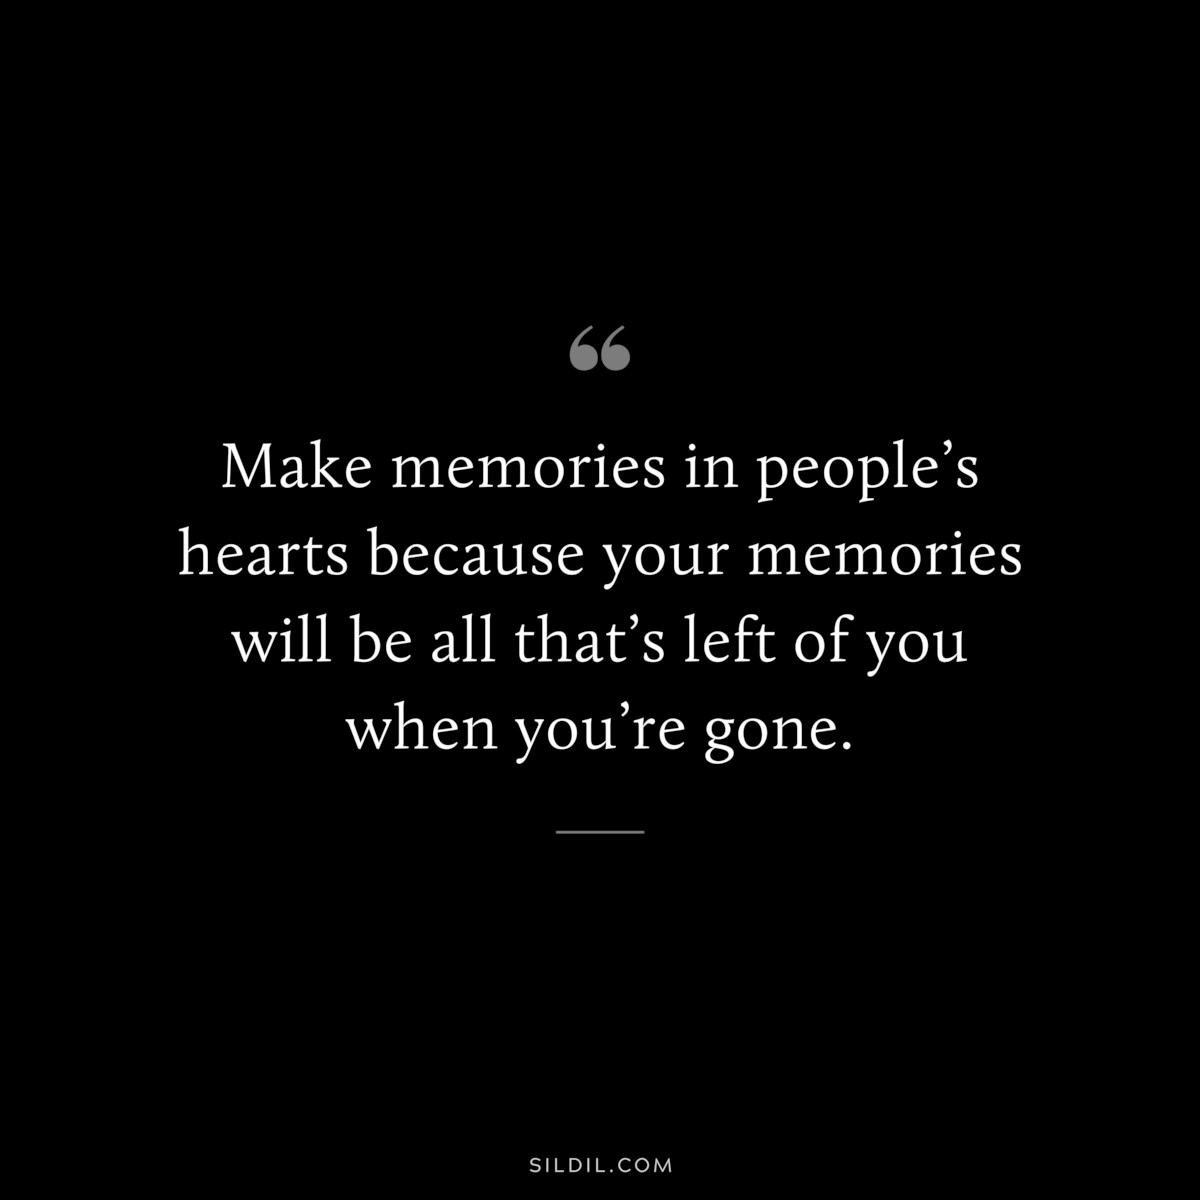 Make memories in people’s hearts because your memories will be all that’s left of you when you’re gone.